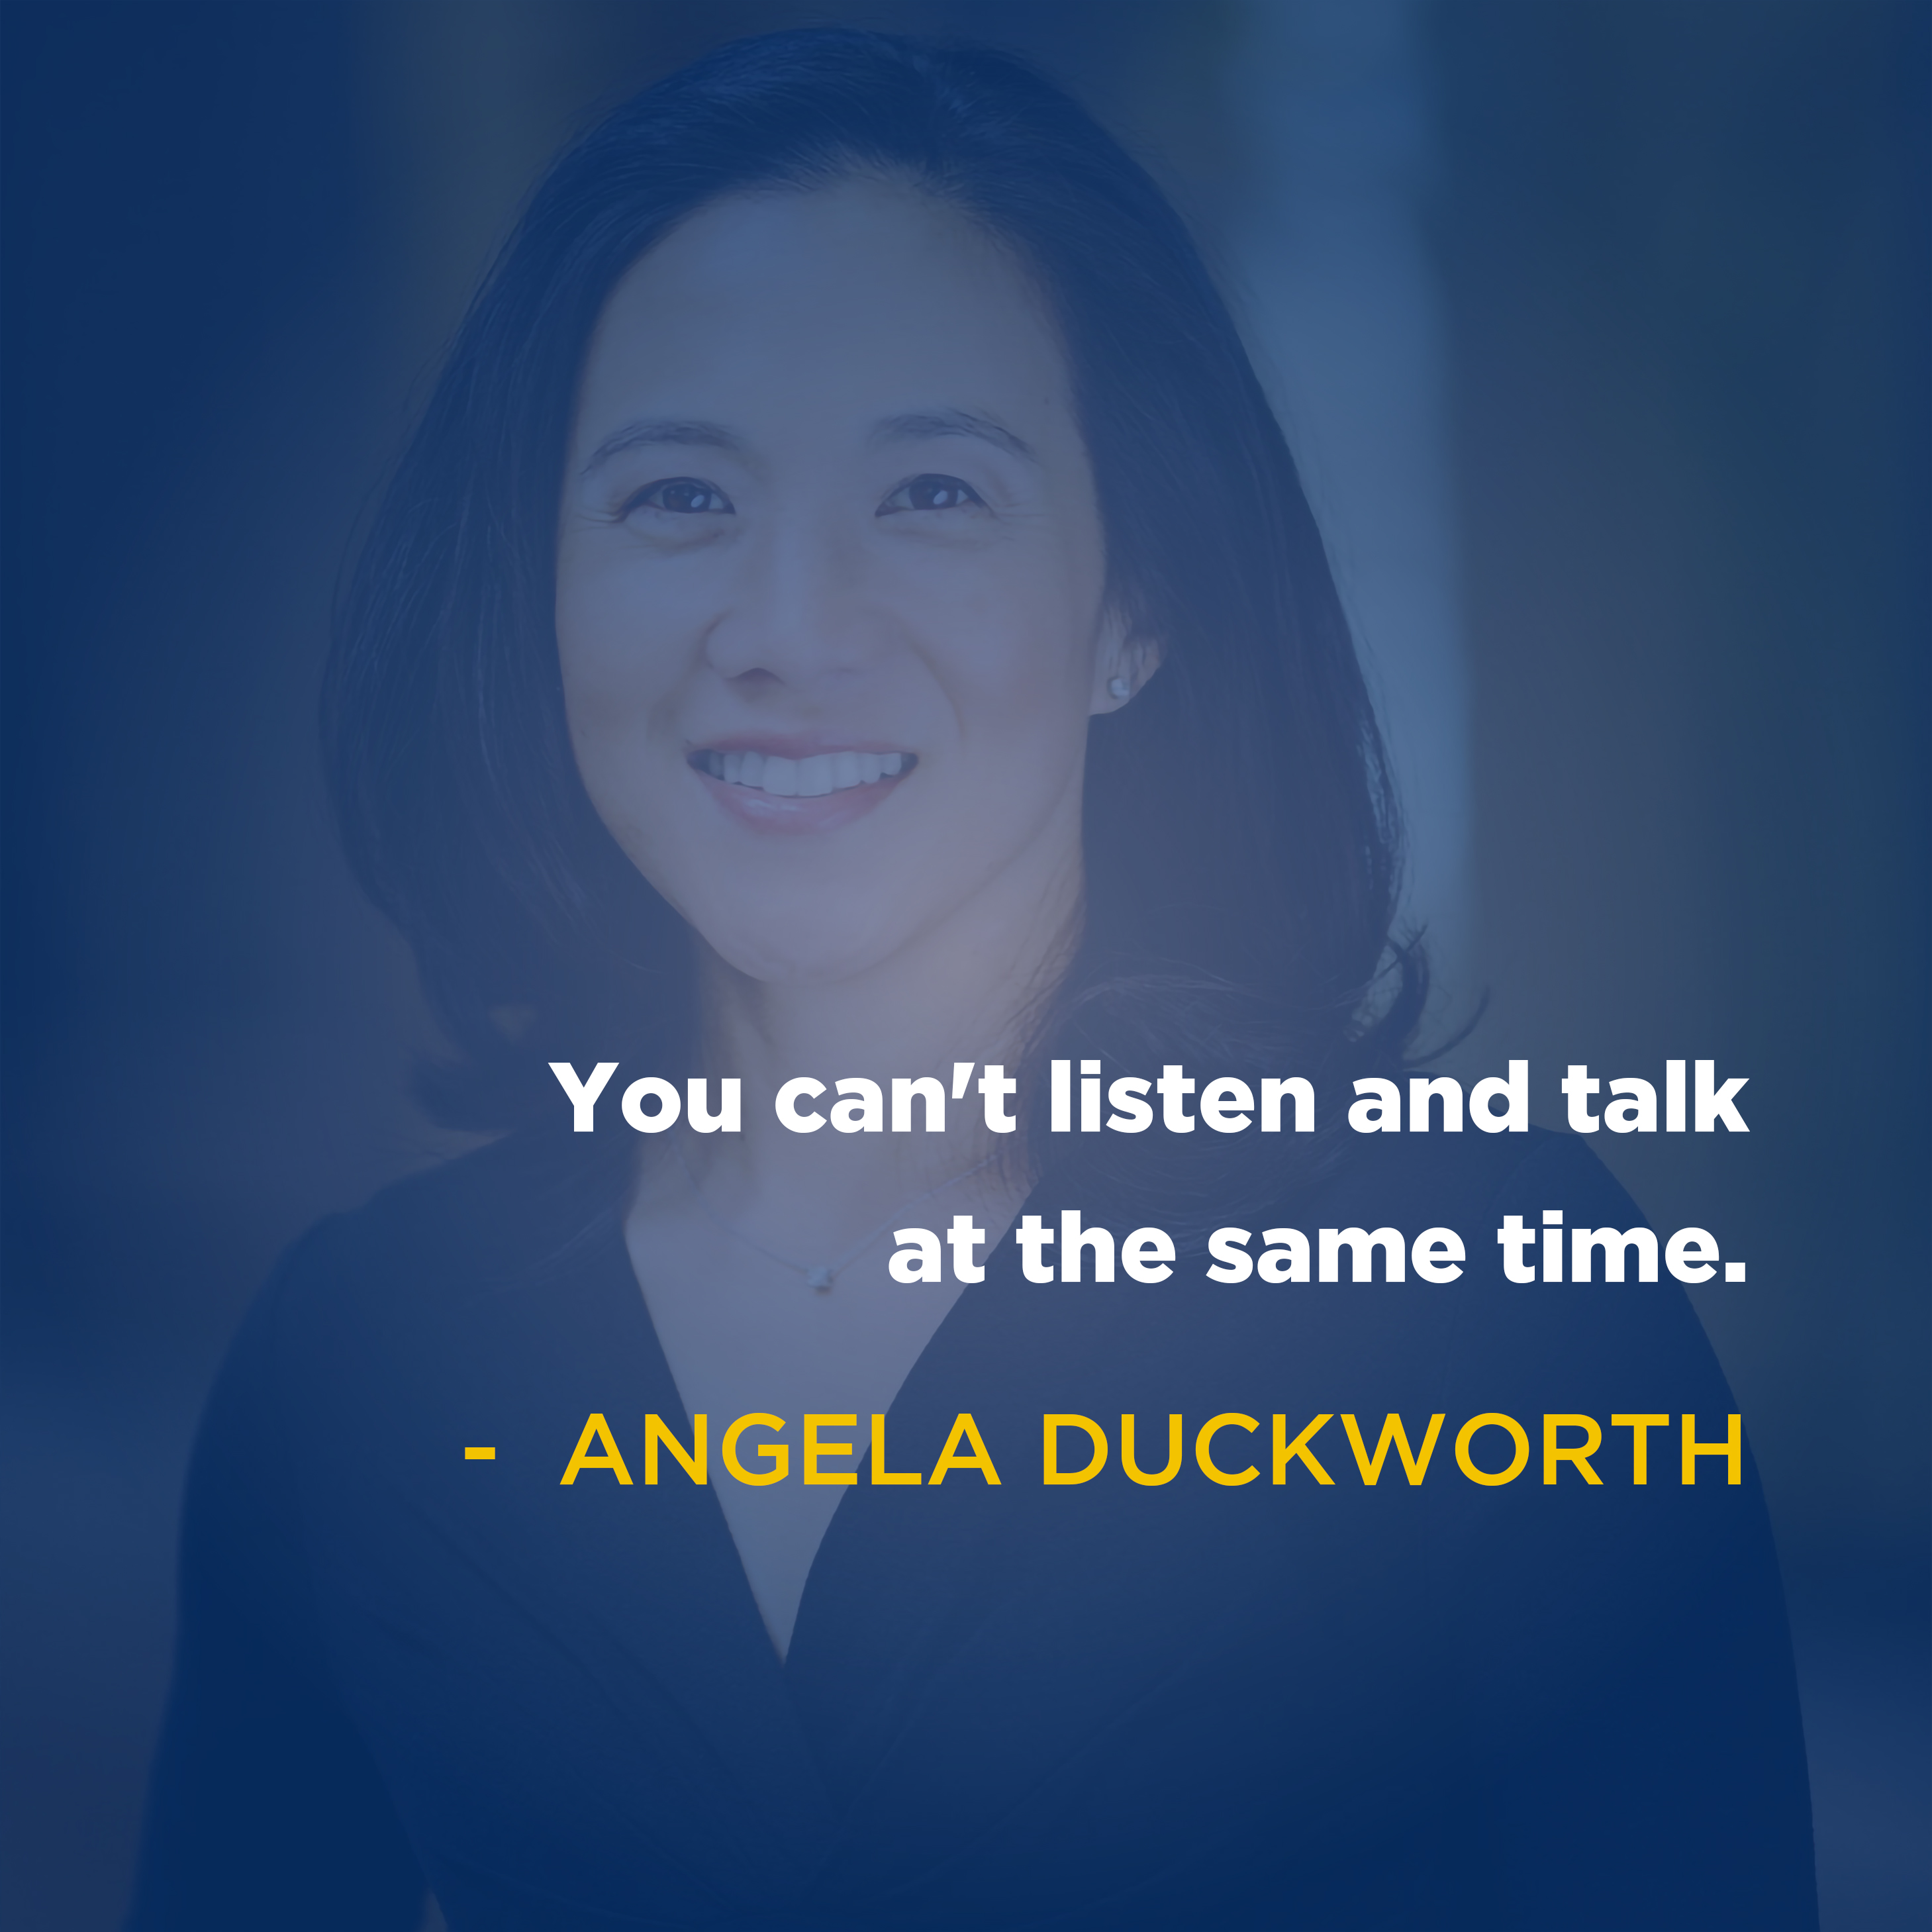 "You can't listen and talk at the same time." -Angela Duckworth